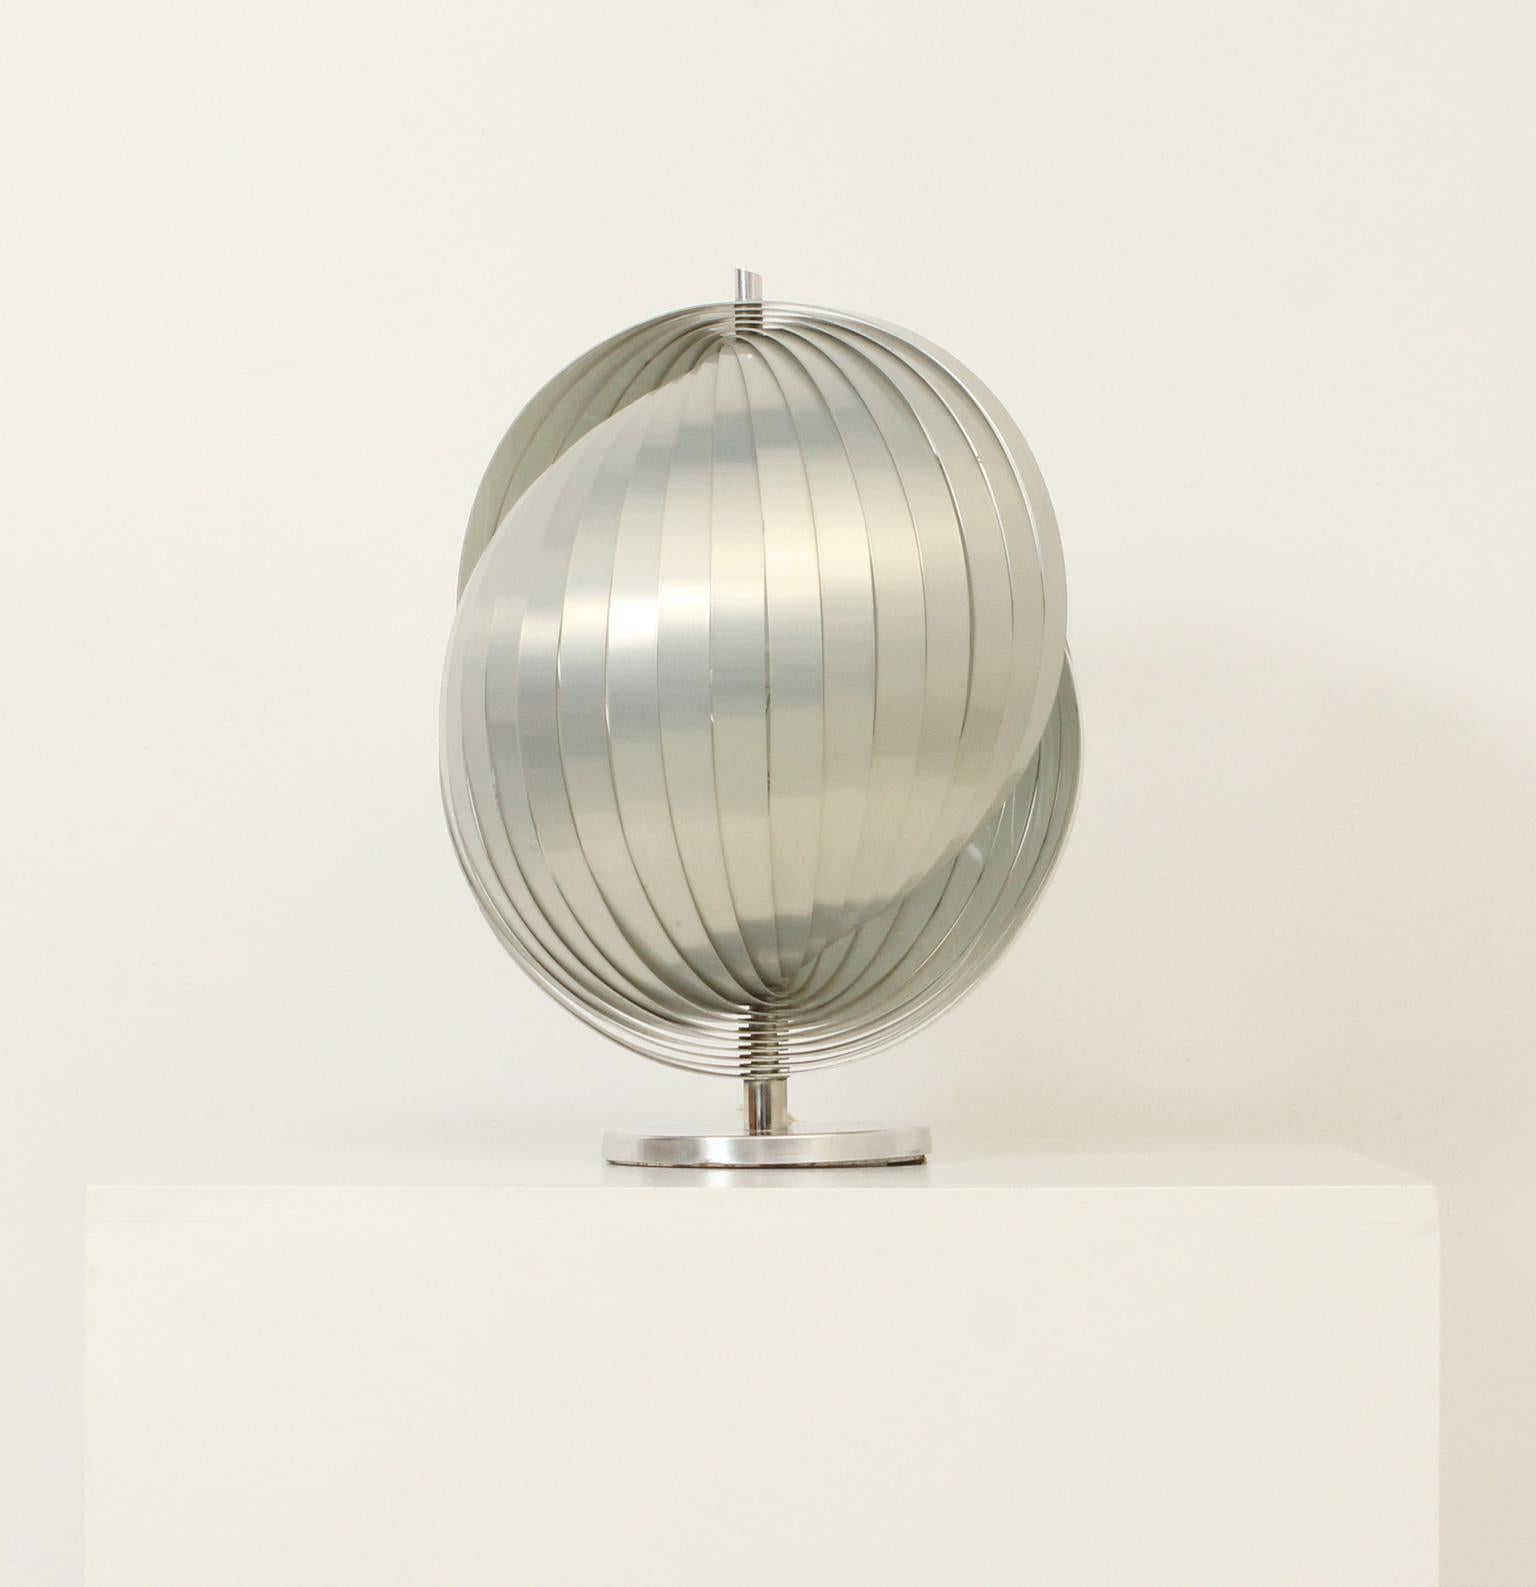 French Moon Table Lamp by Henri Mathieu, France, 1972